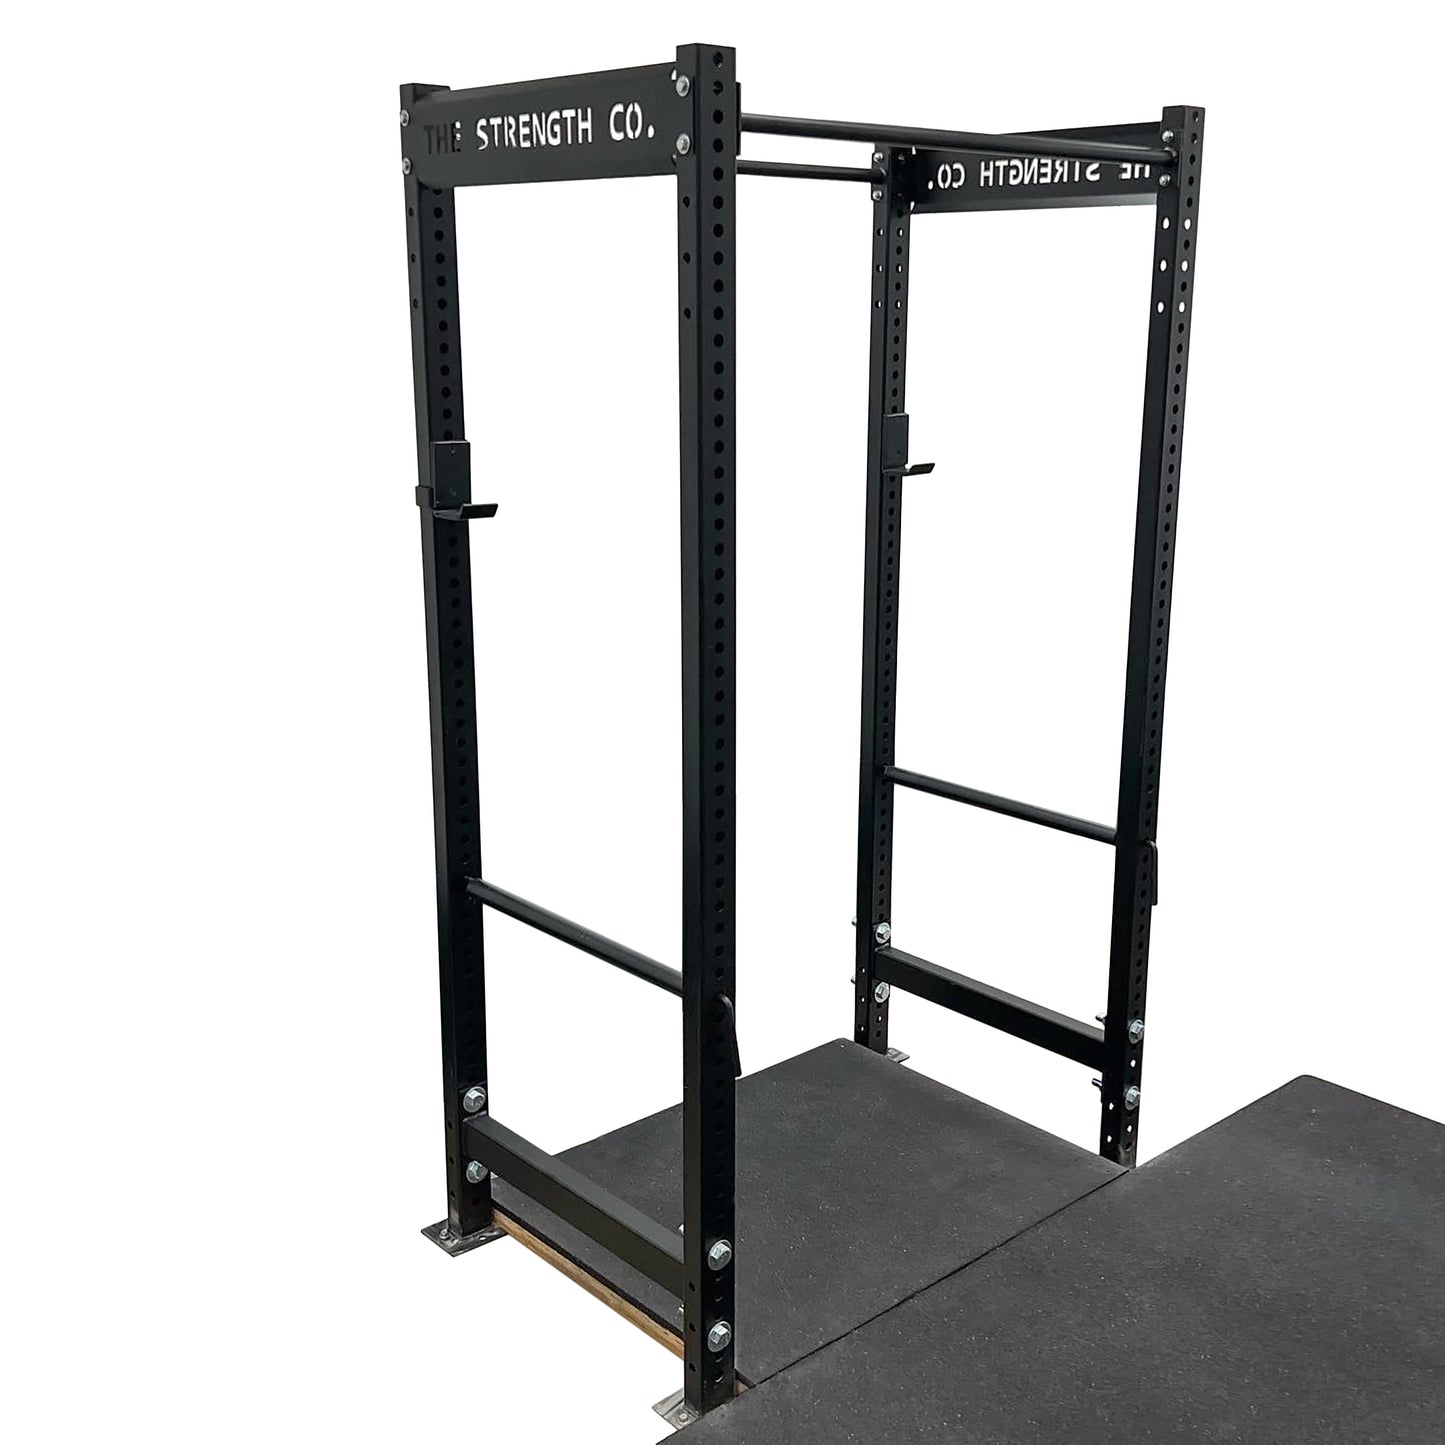 USA Power Squat Rack - "The General"